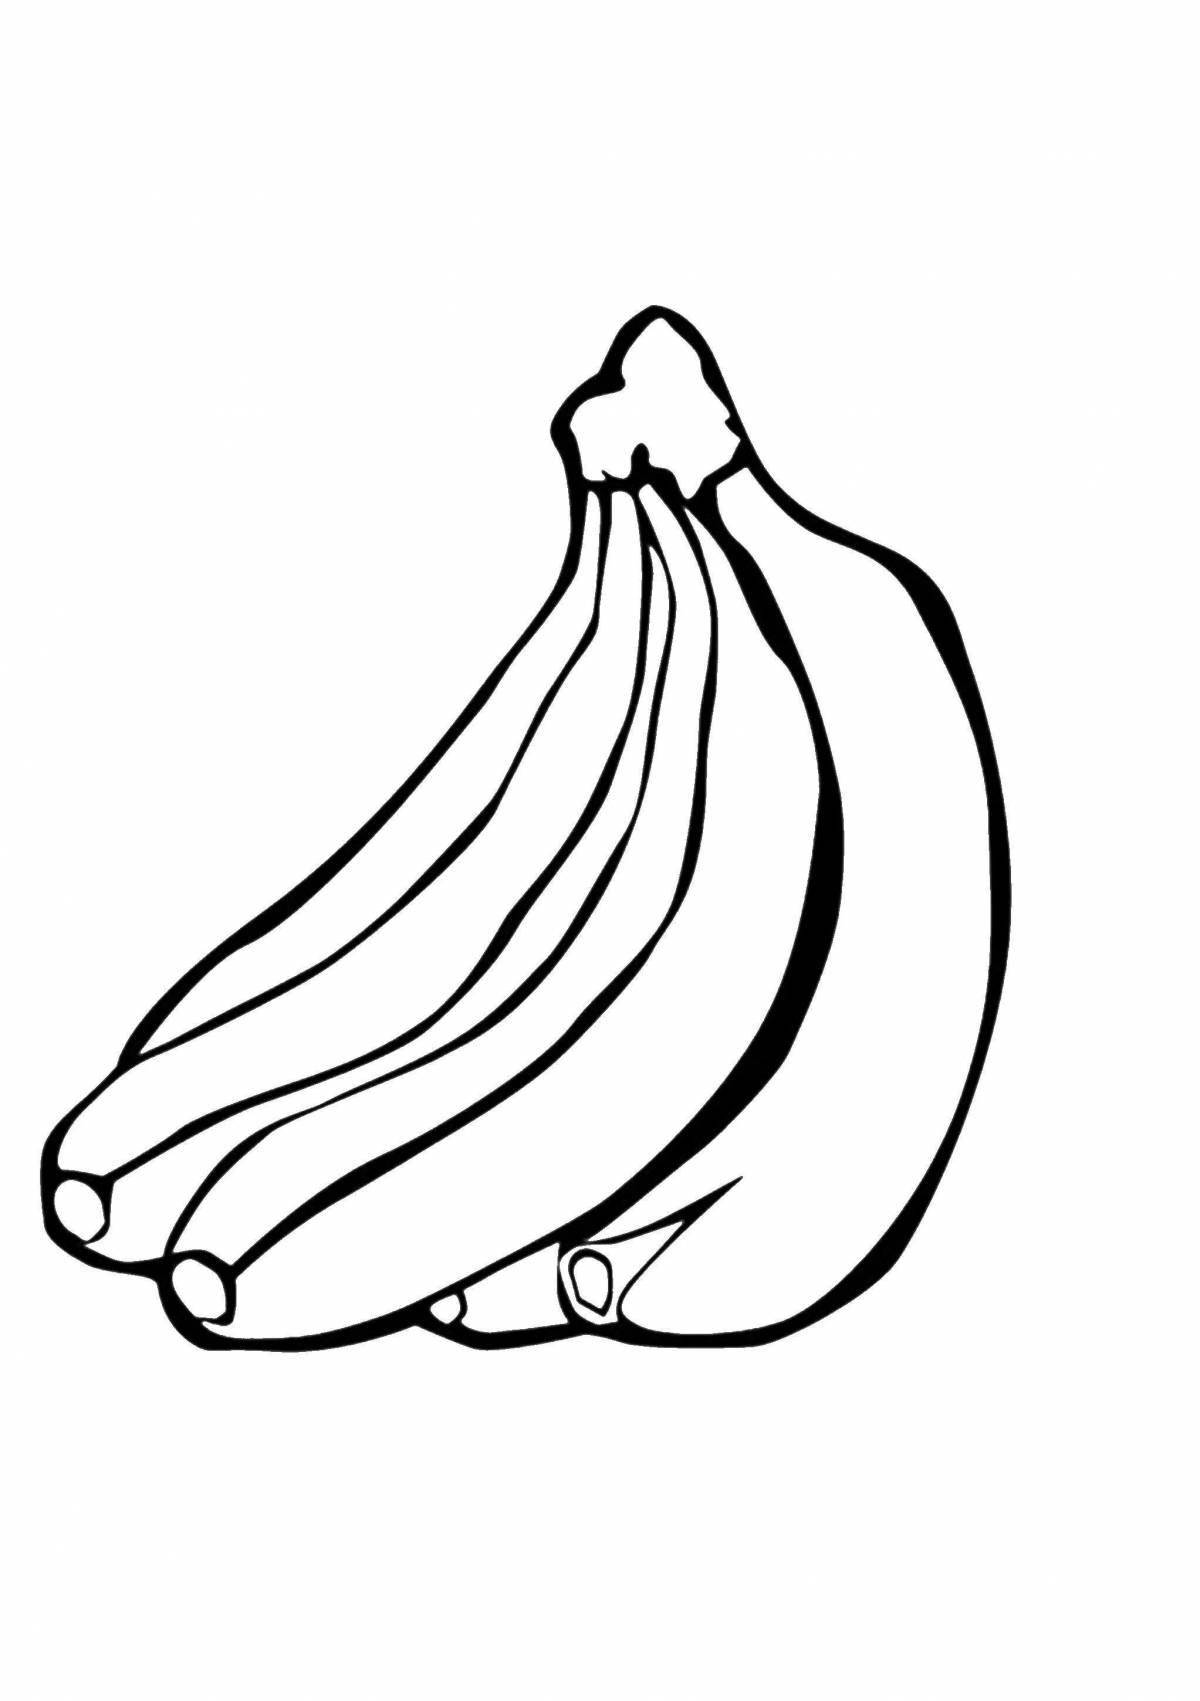 Banana apple coloring page with color fill